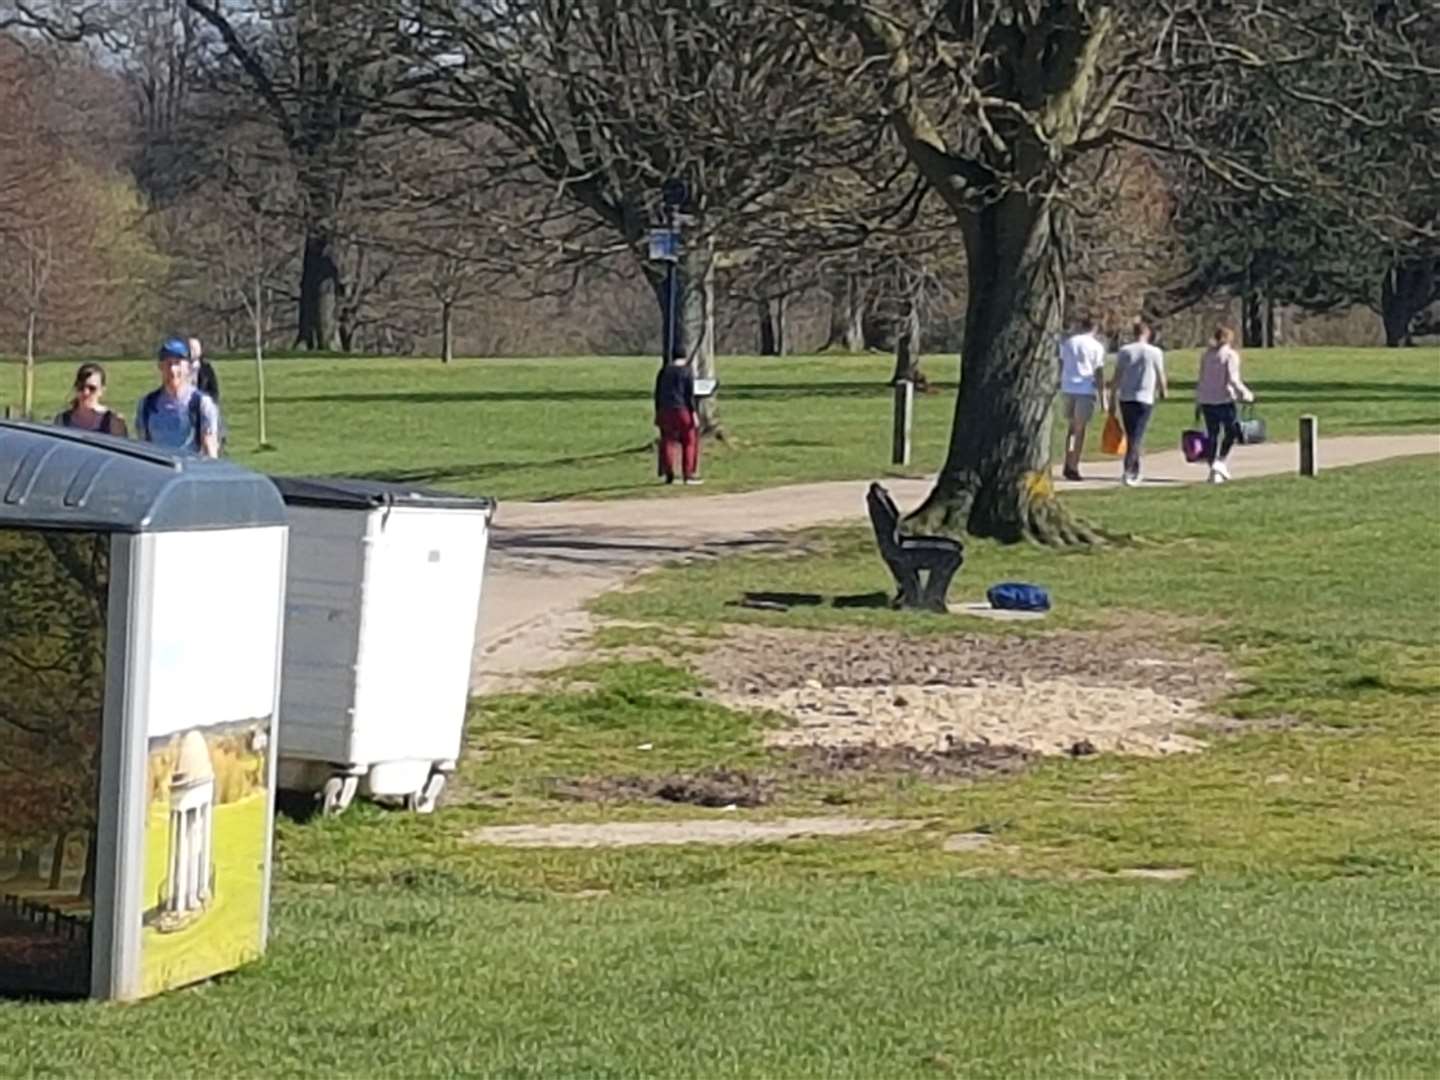 People were seen in Mote Park in Maidstone during the sunshine despite the lockdown